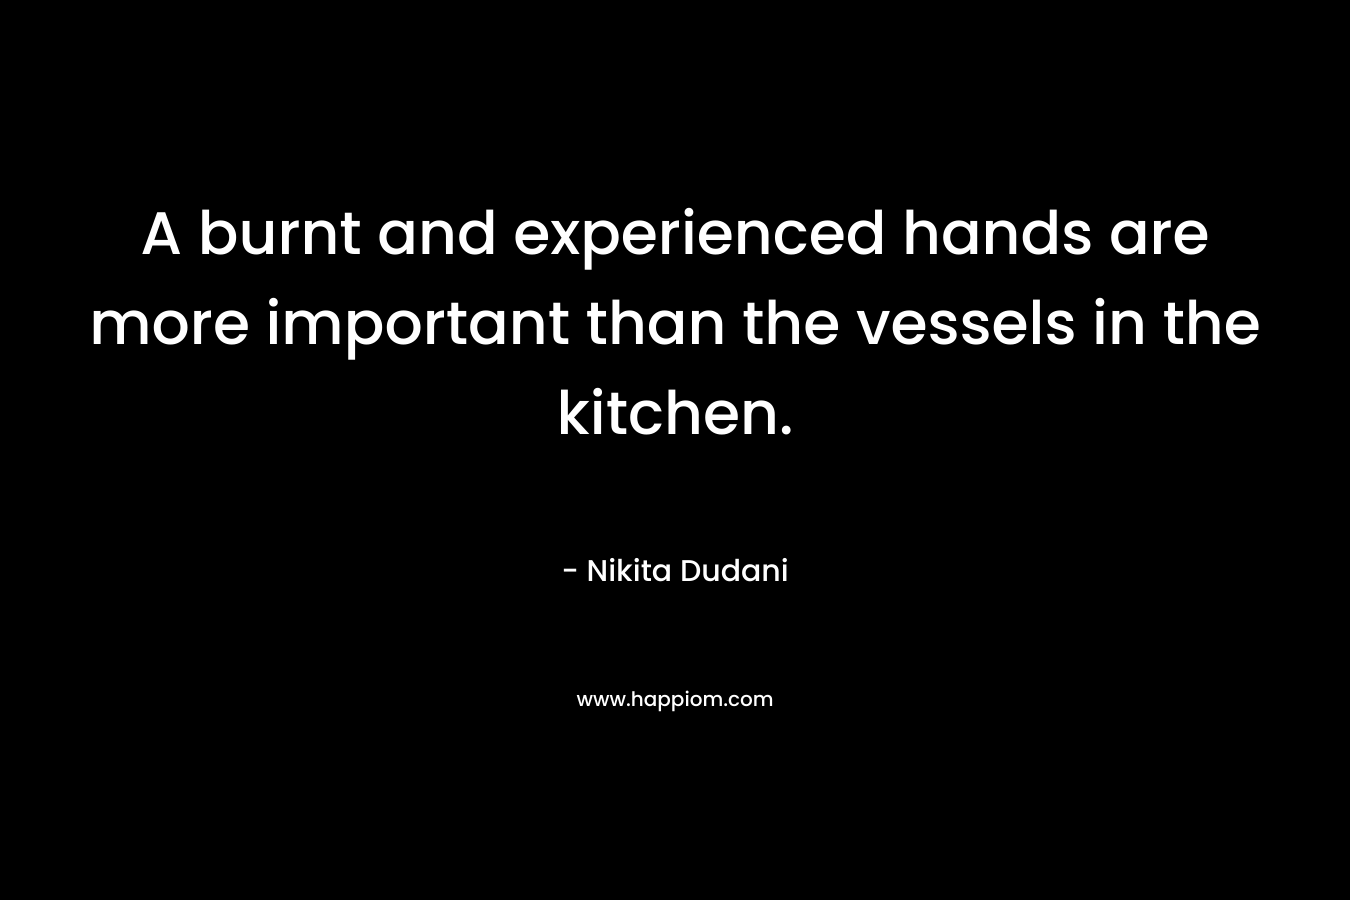 A burnt and experienced hands are more important than the vessels in the kitchen. – Nikita Dudani